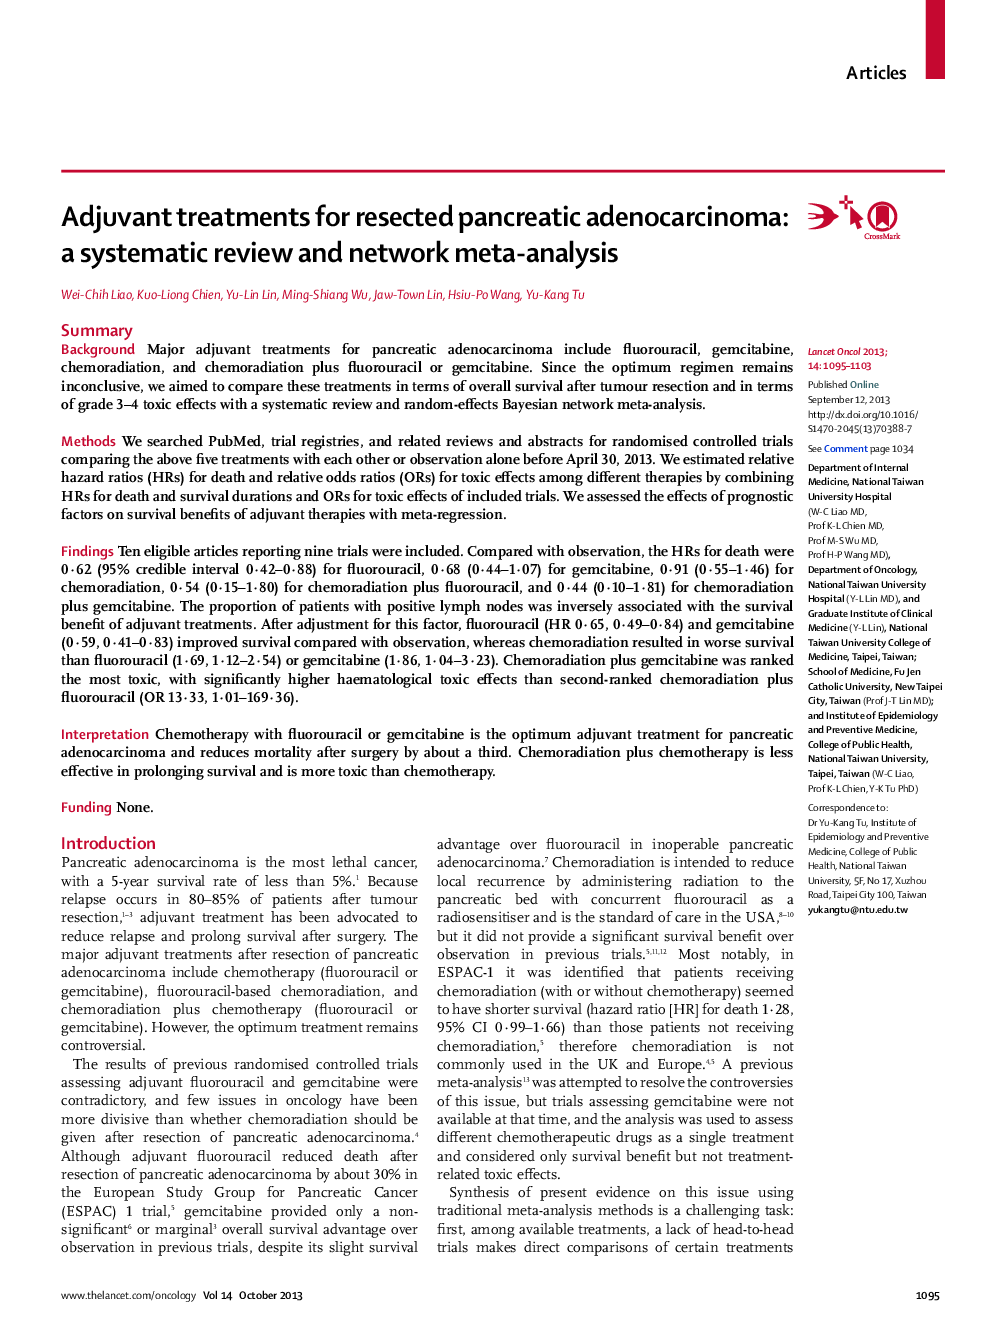 Adjuvant treatments for resected pancreatic adenocarcinoma: a systematic review and network meta-analysis